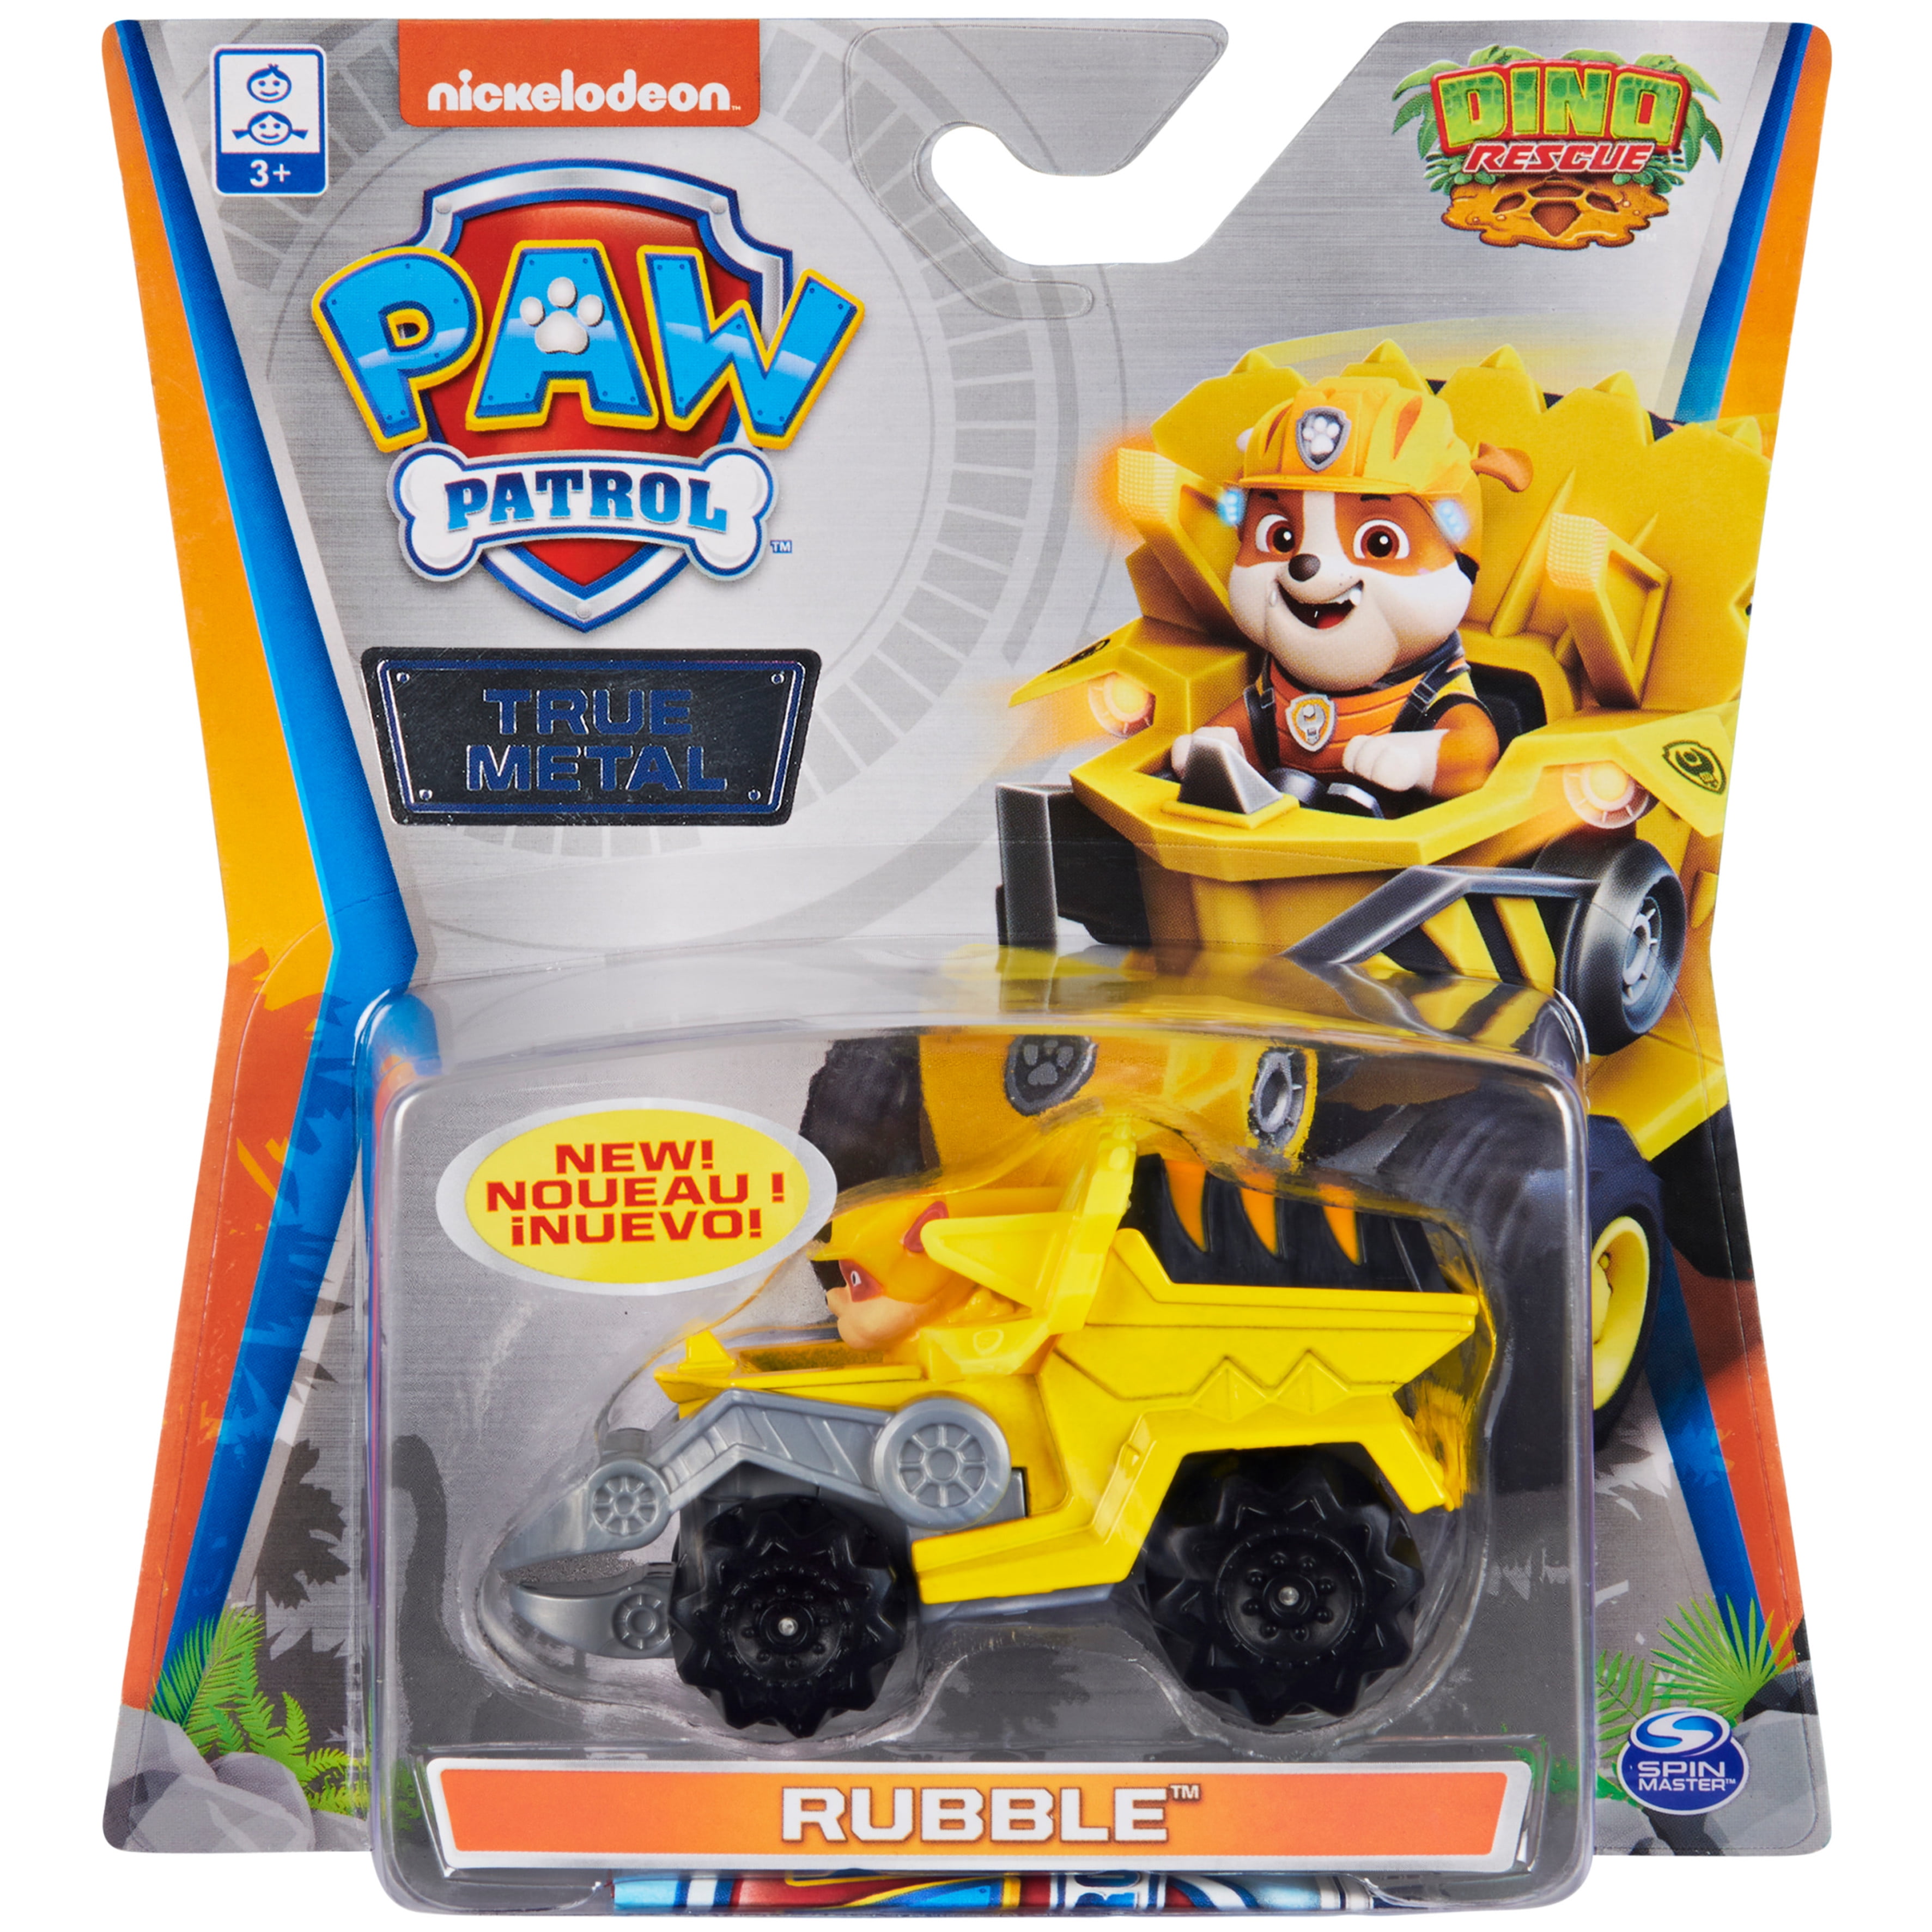 Paw Patrol's Rubble to get his own spin-off series - Brands Untapped